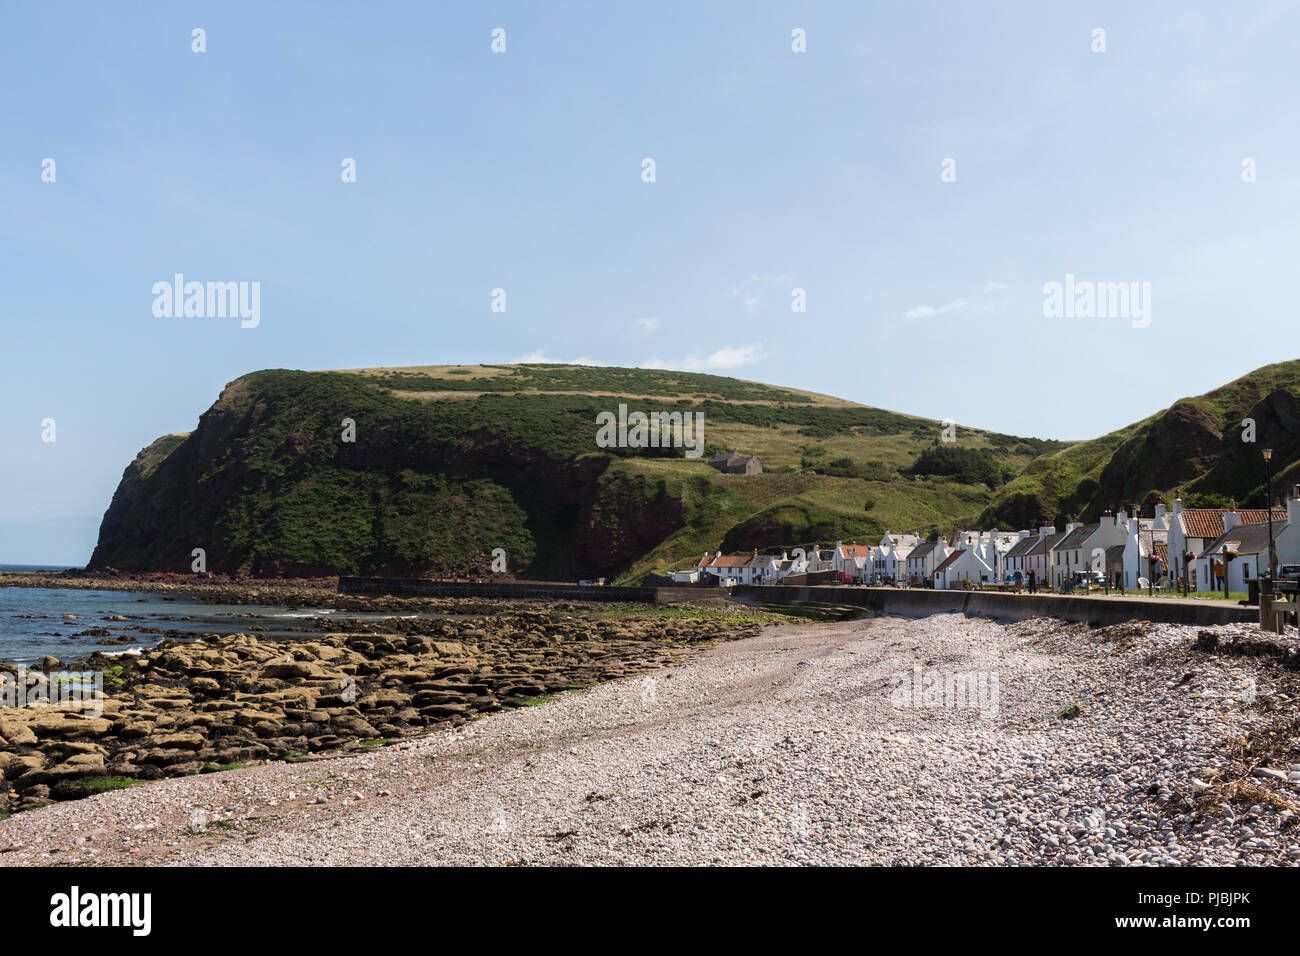 Pennan Village, Aberdeenshire, Scotland, UK. One of the locations of the film Local Hero. Located on the North East 250 travel route. Stock Photo